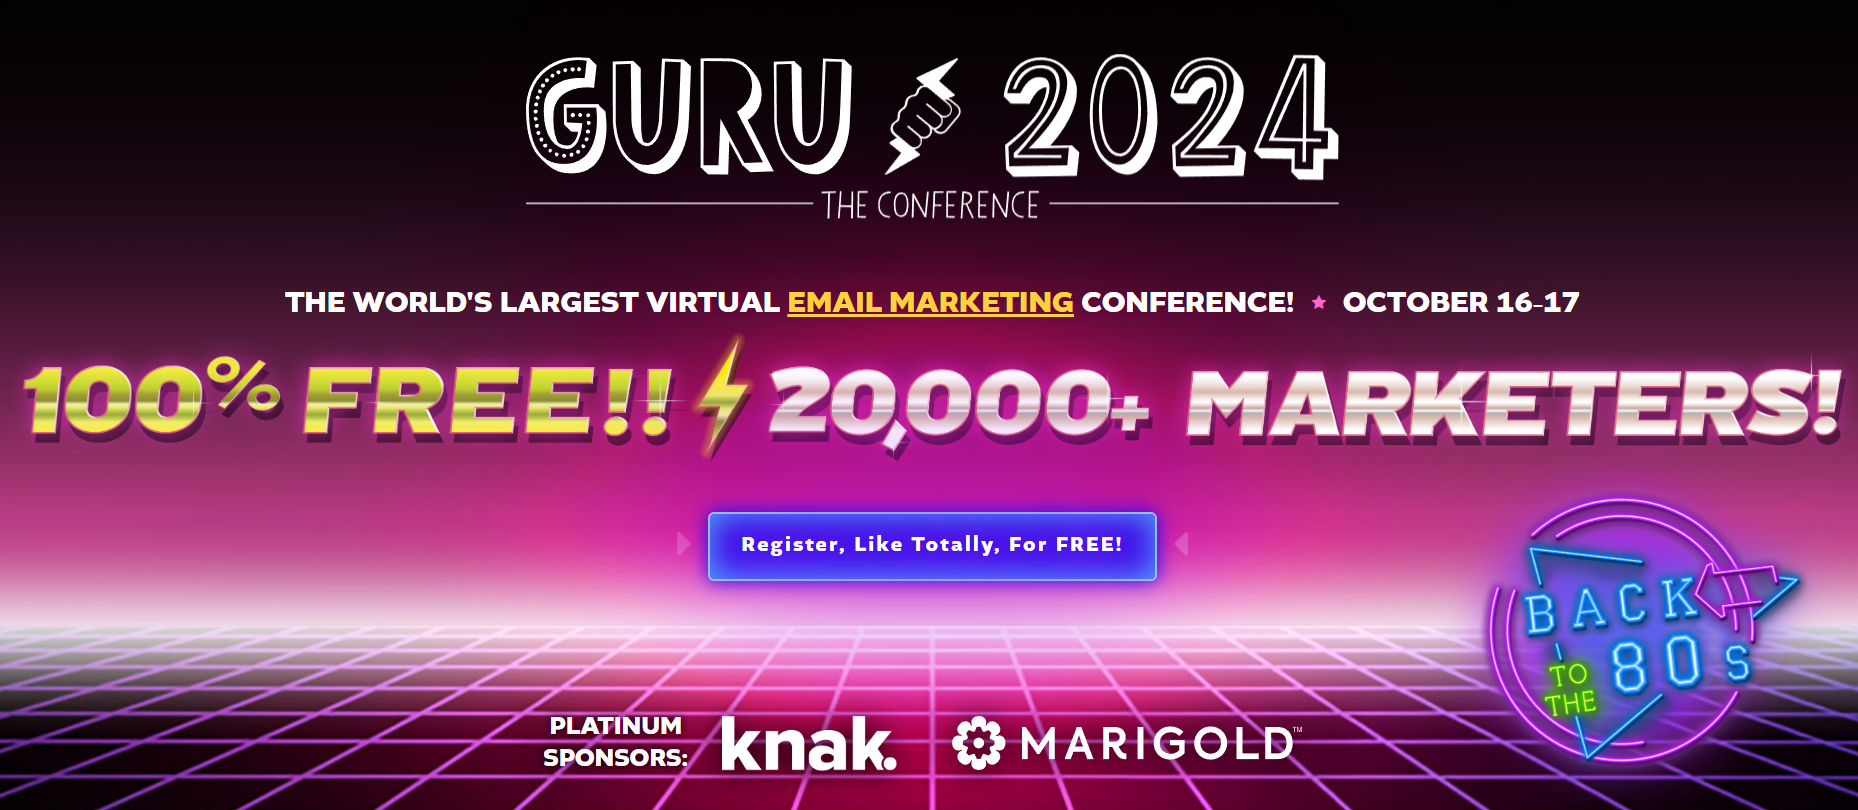 The GURU Conference _ Top email marketing events